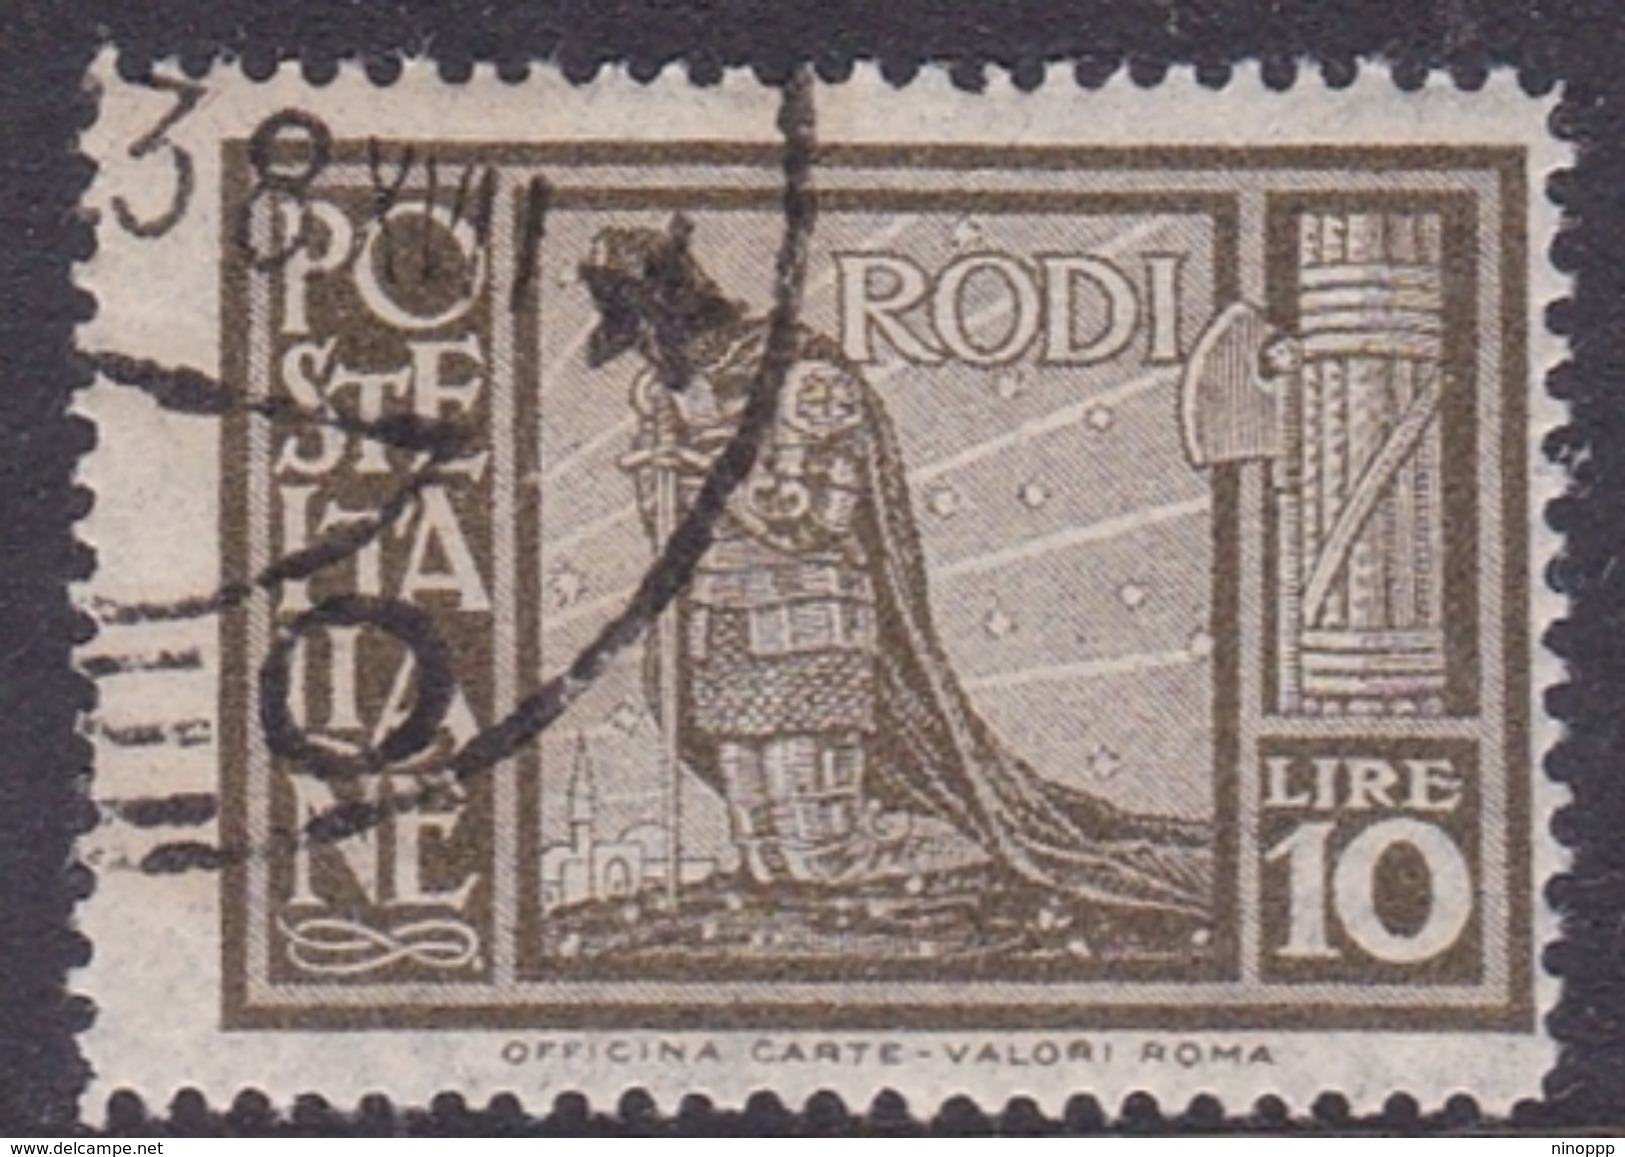 Italy-Colonies And Territories-Aegean General Issue-Rodi S64 1932 Pictorials Perf 14 Lire 10 Olive Used - Algemene Uitgaven